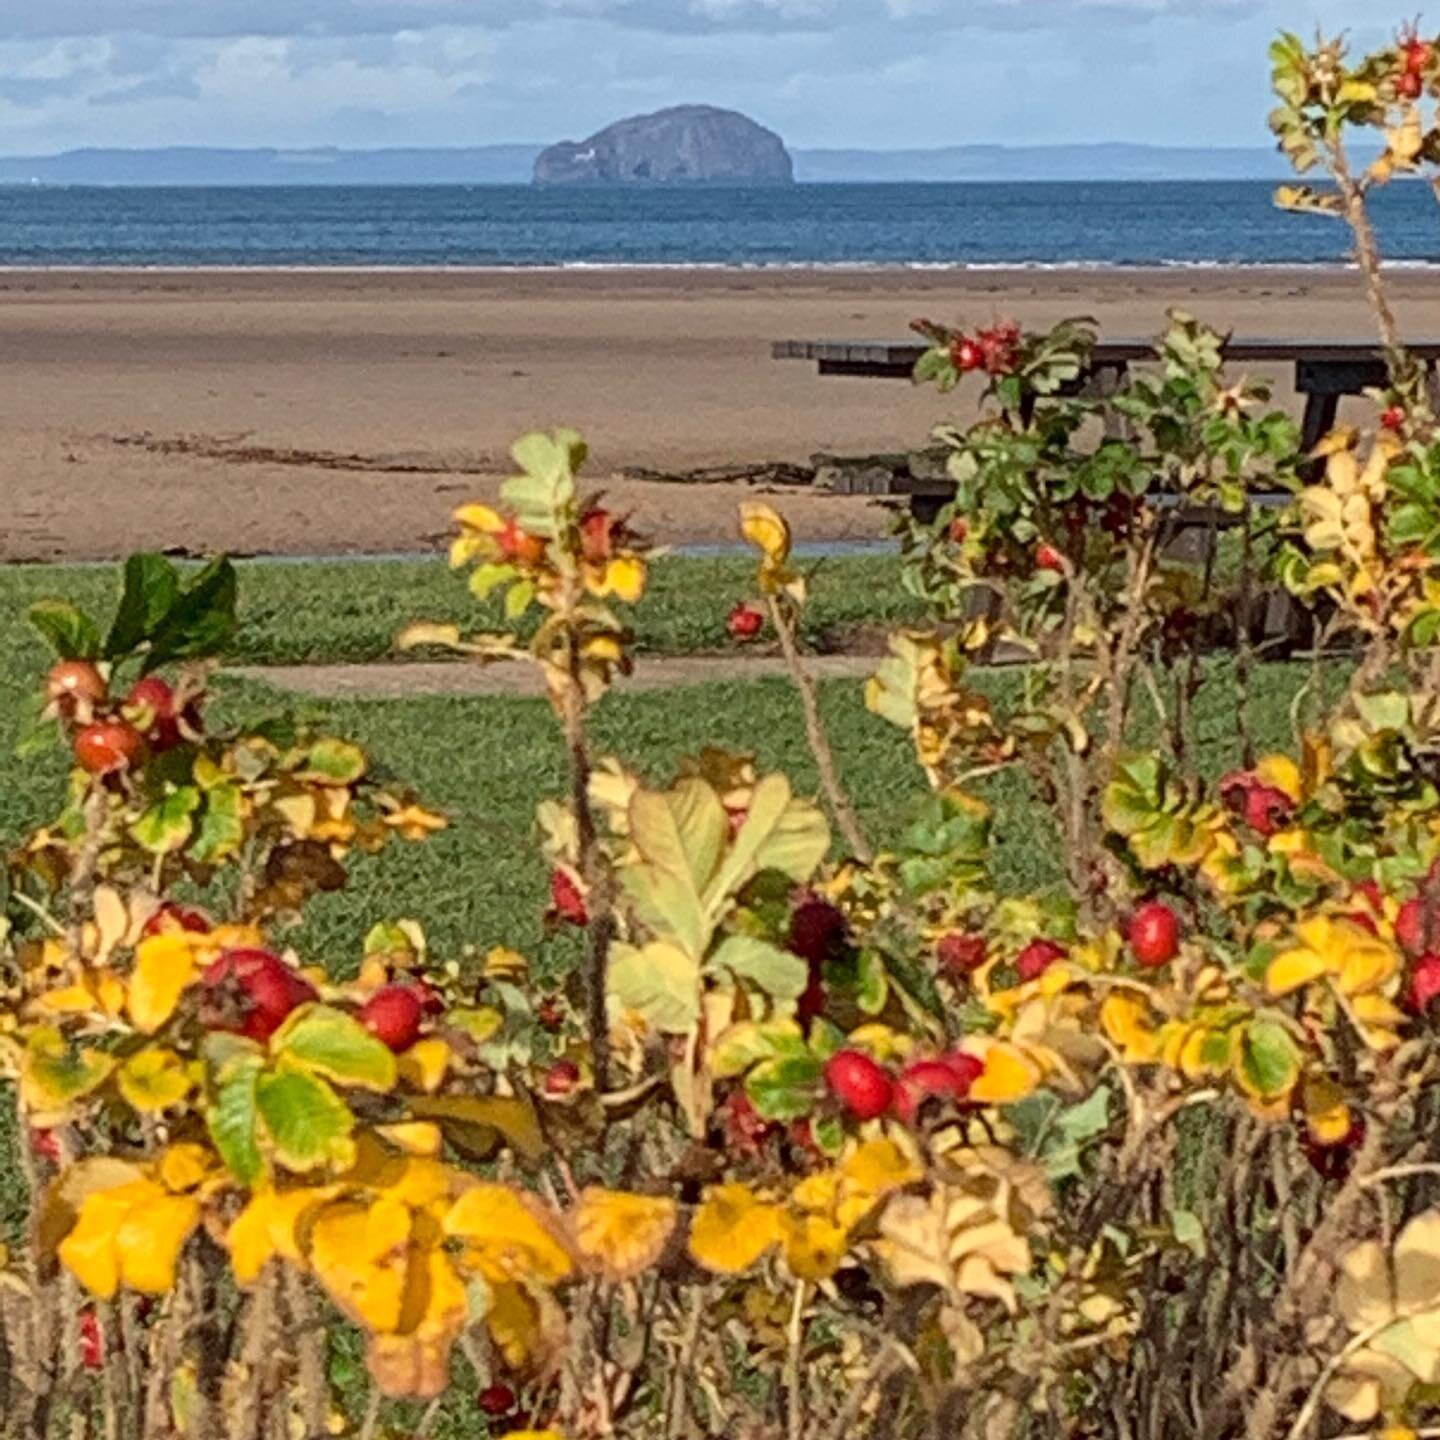 Hard to believe this is Belhaven Bay in November!
We can still have guests at the cabin from the East Lothian Council area, so if you fancy a local holiday get in touch. 🏴󠁧󠁢󠁳󠁣󠁴󠁿 🌊 #curlewcabin #eastlothian #staycation #visitscotland #autumnvi